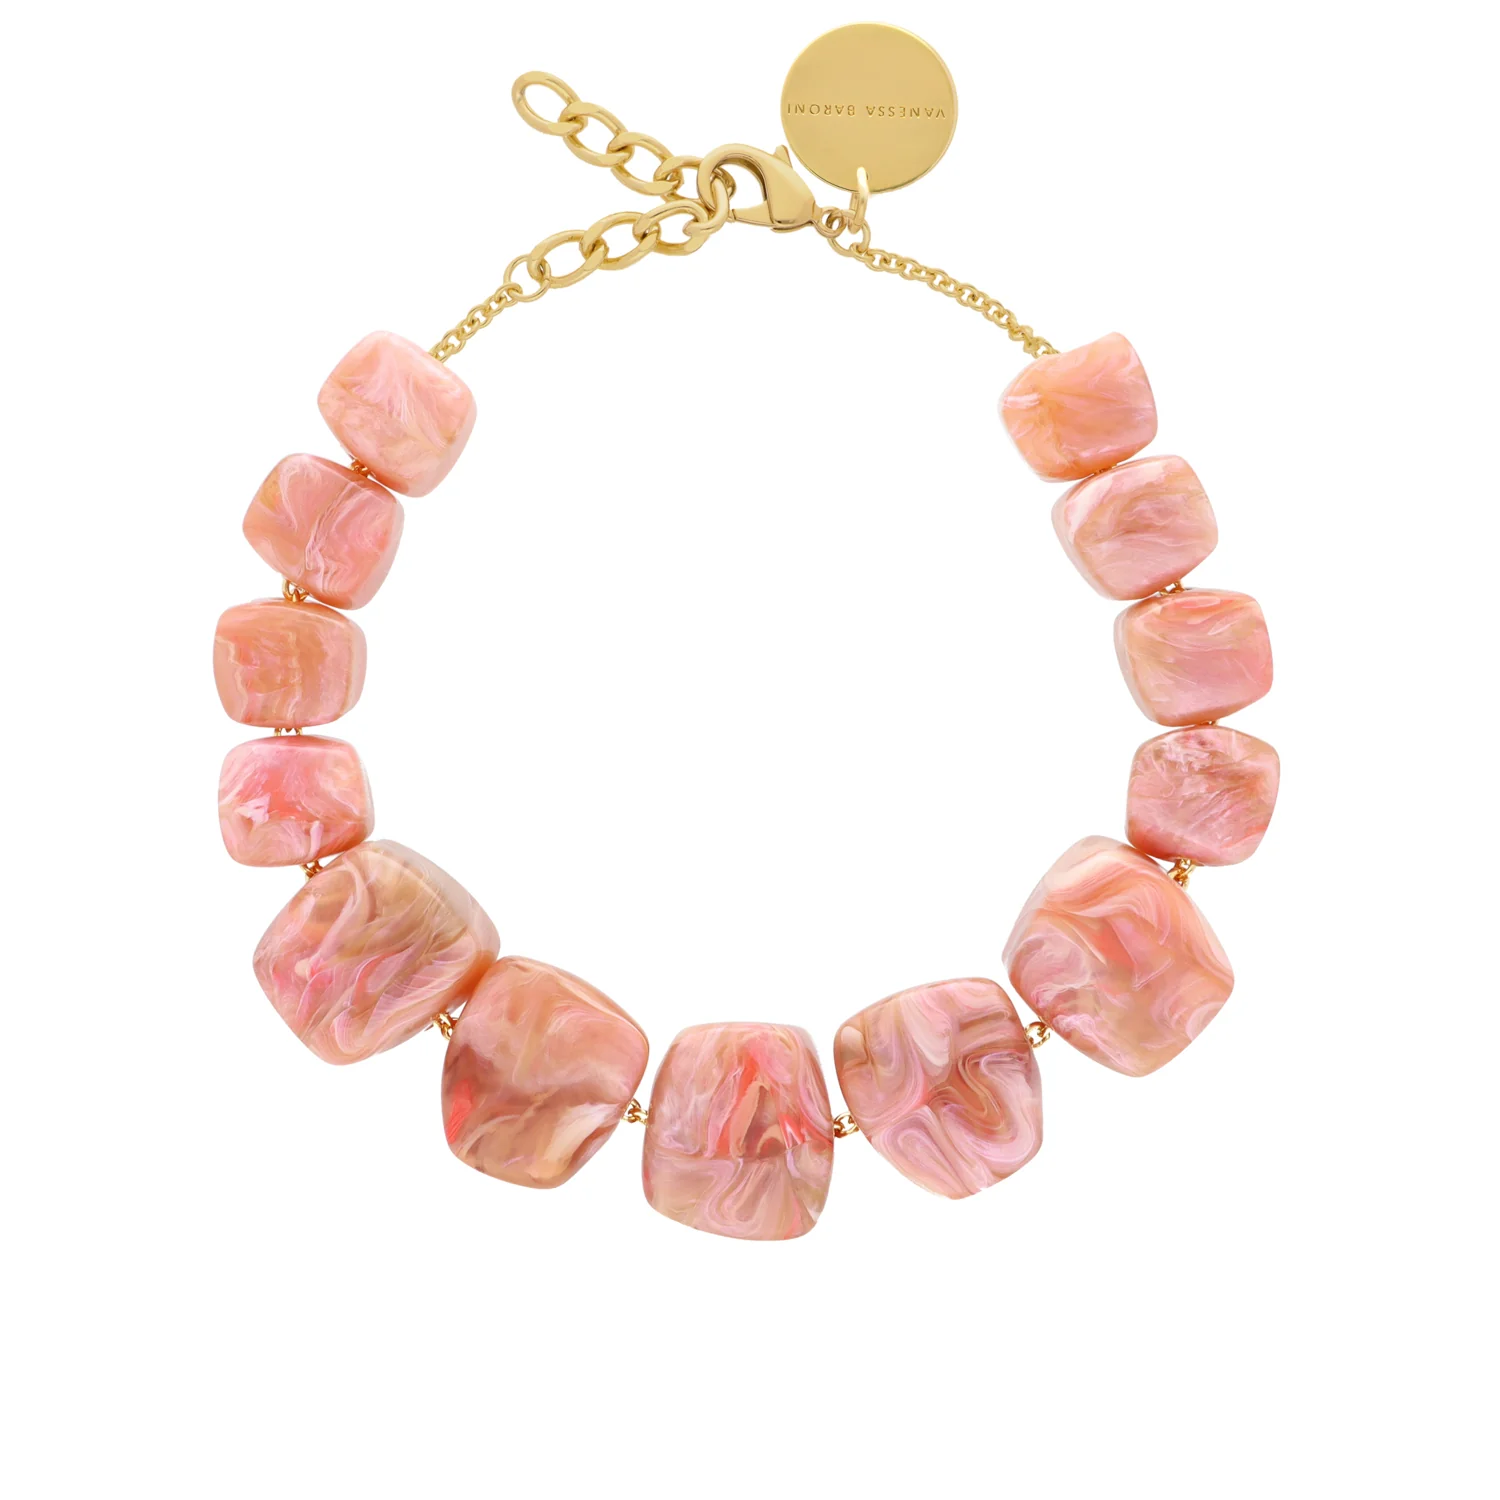 Big Organic Shaped Necklace Peach Marble